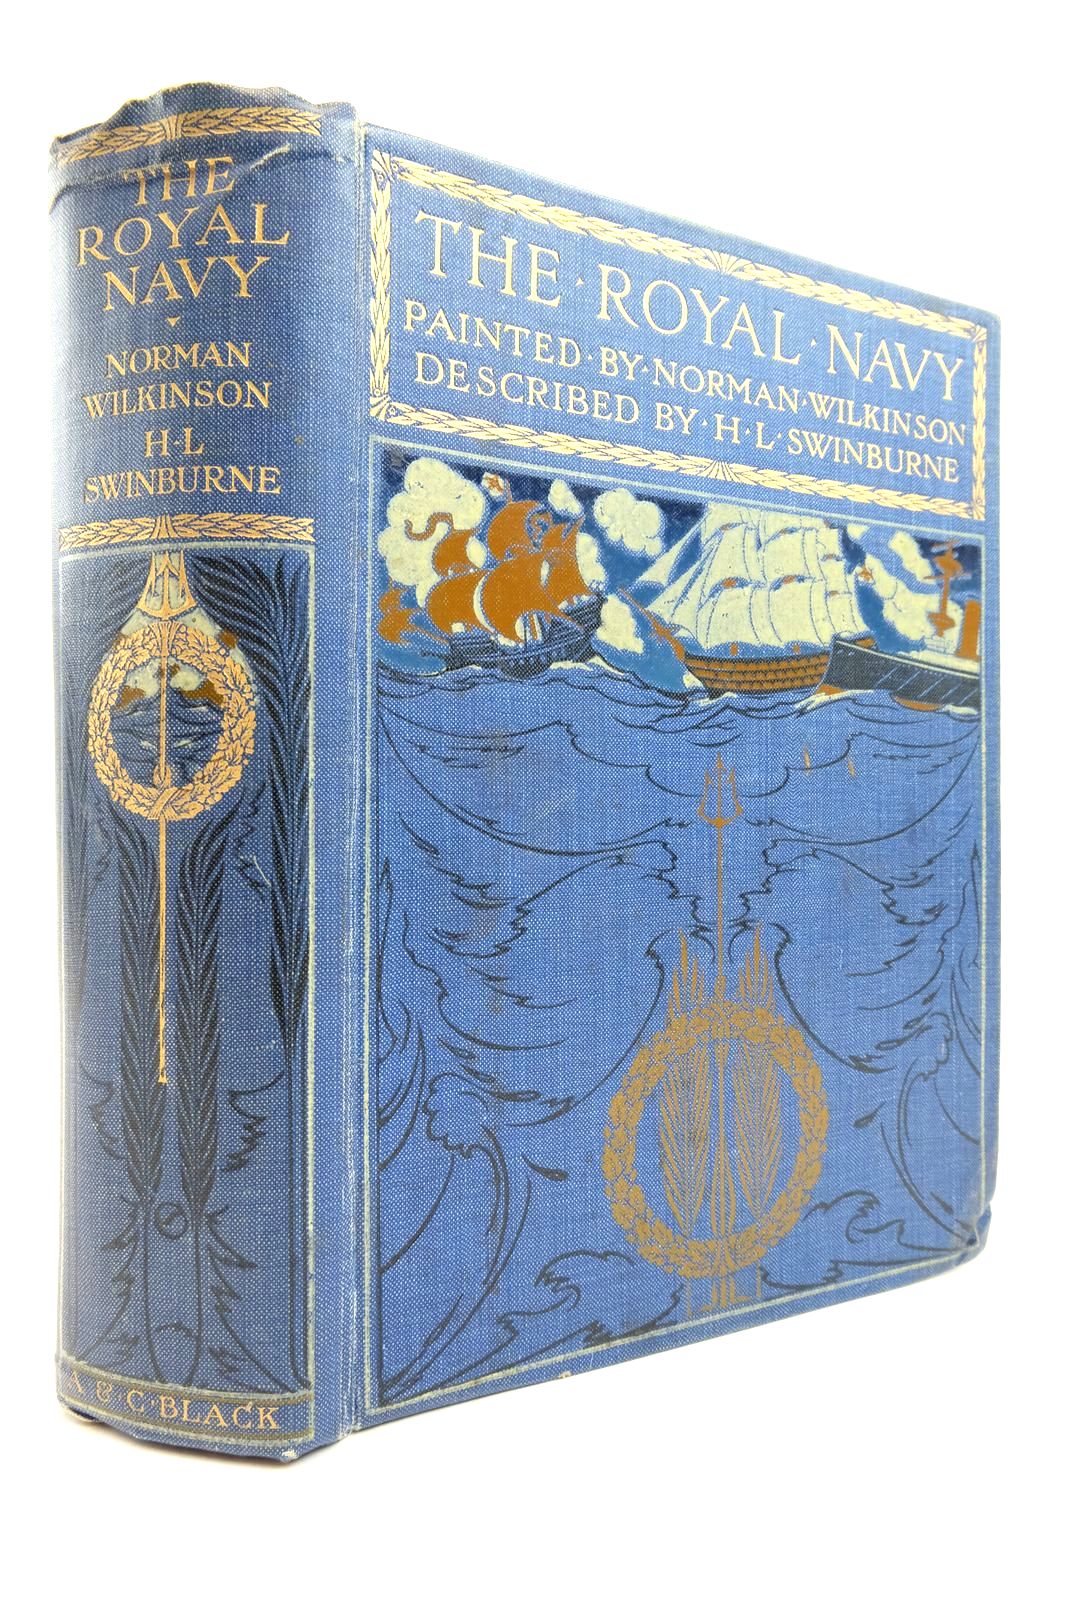 Photo of THE ROYAL NAVY written by Swinburne, H. Lawrence illustrated by Wilkinson, Norman
Jellicoe, J. published by Adam & Charles Black (STOCK CODE: 2137509)  for sale by Stella & Rose's Books